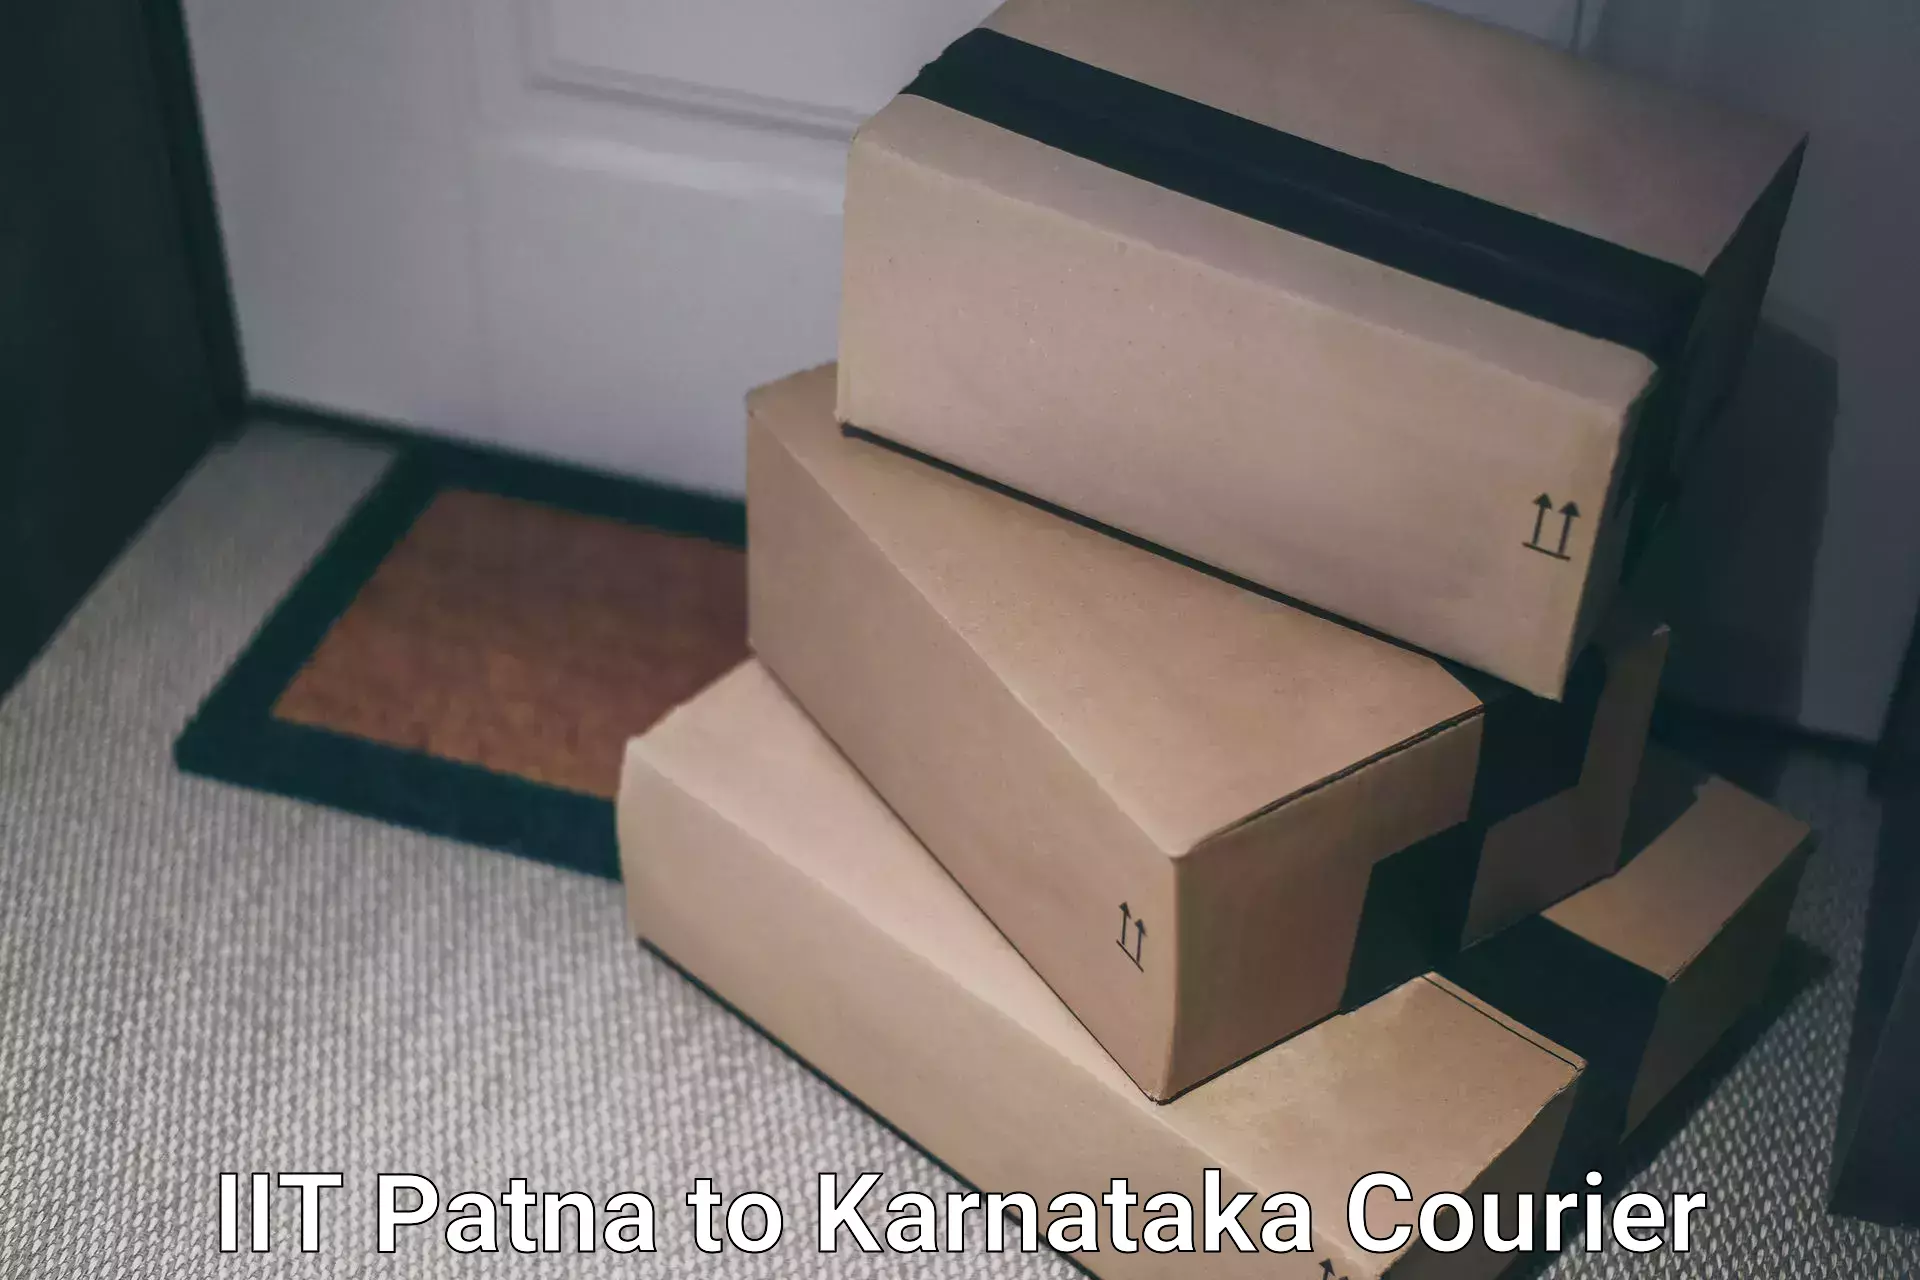 Courier service partnerships IIT Patna to Afzalpur